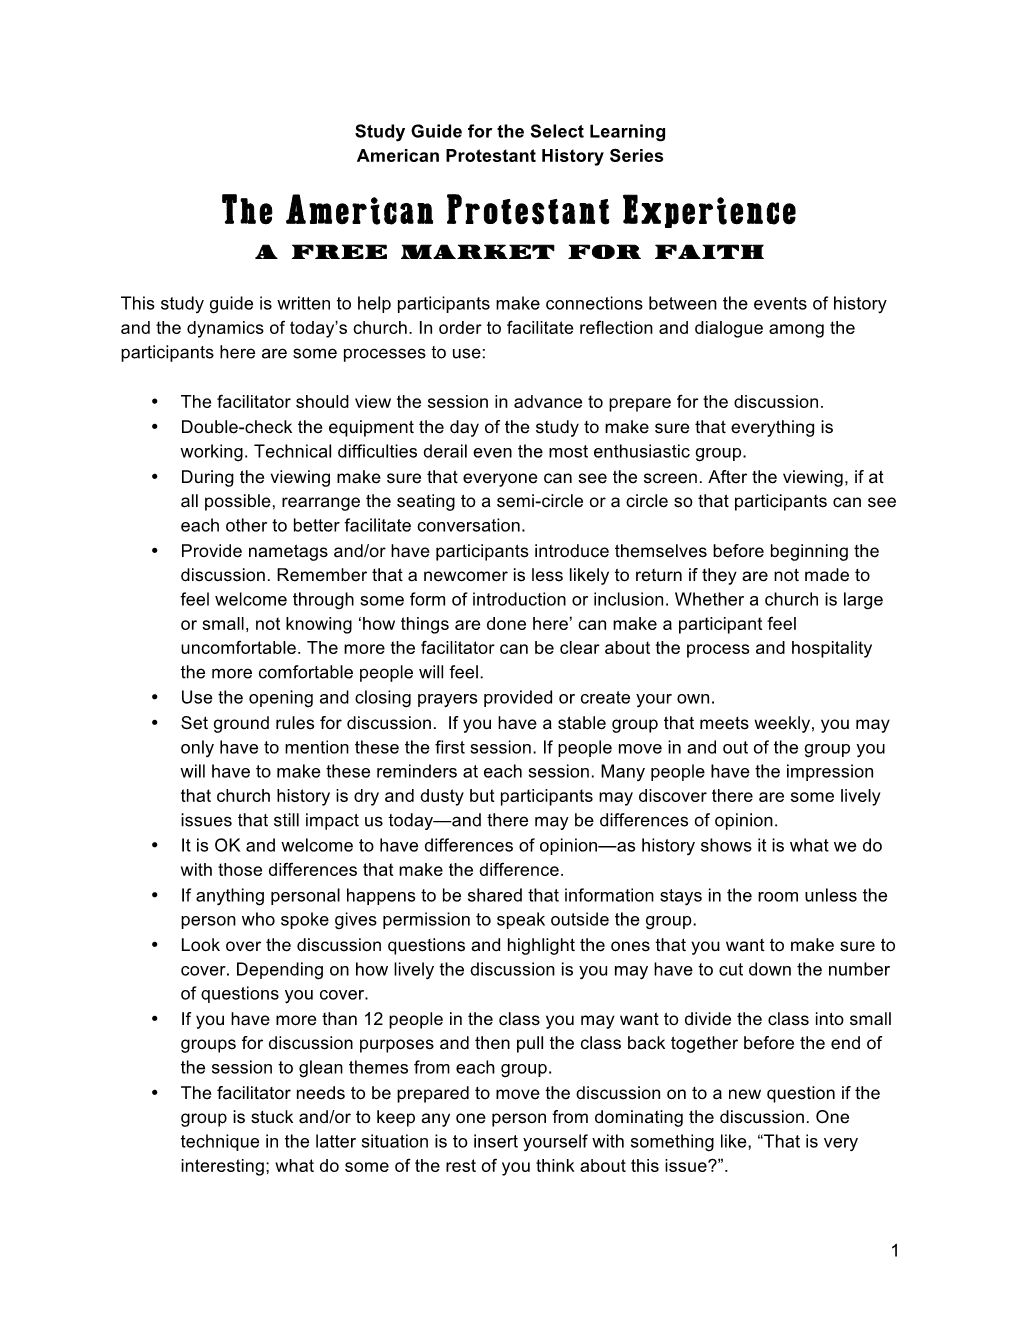 The American Protestant Experience Study Guide